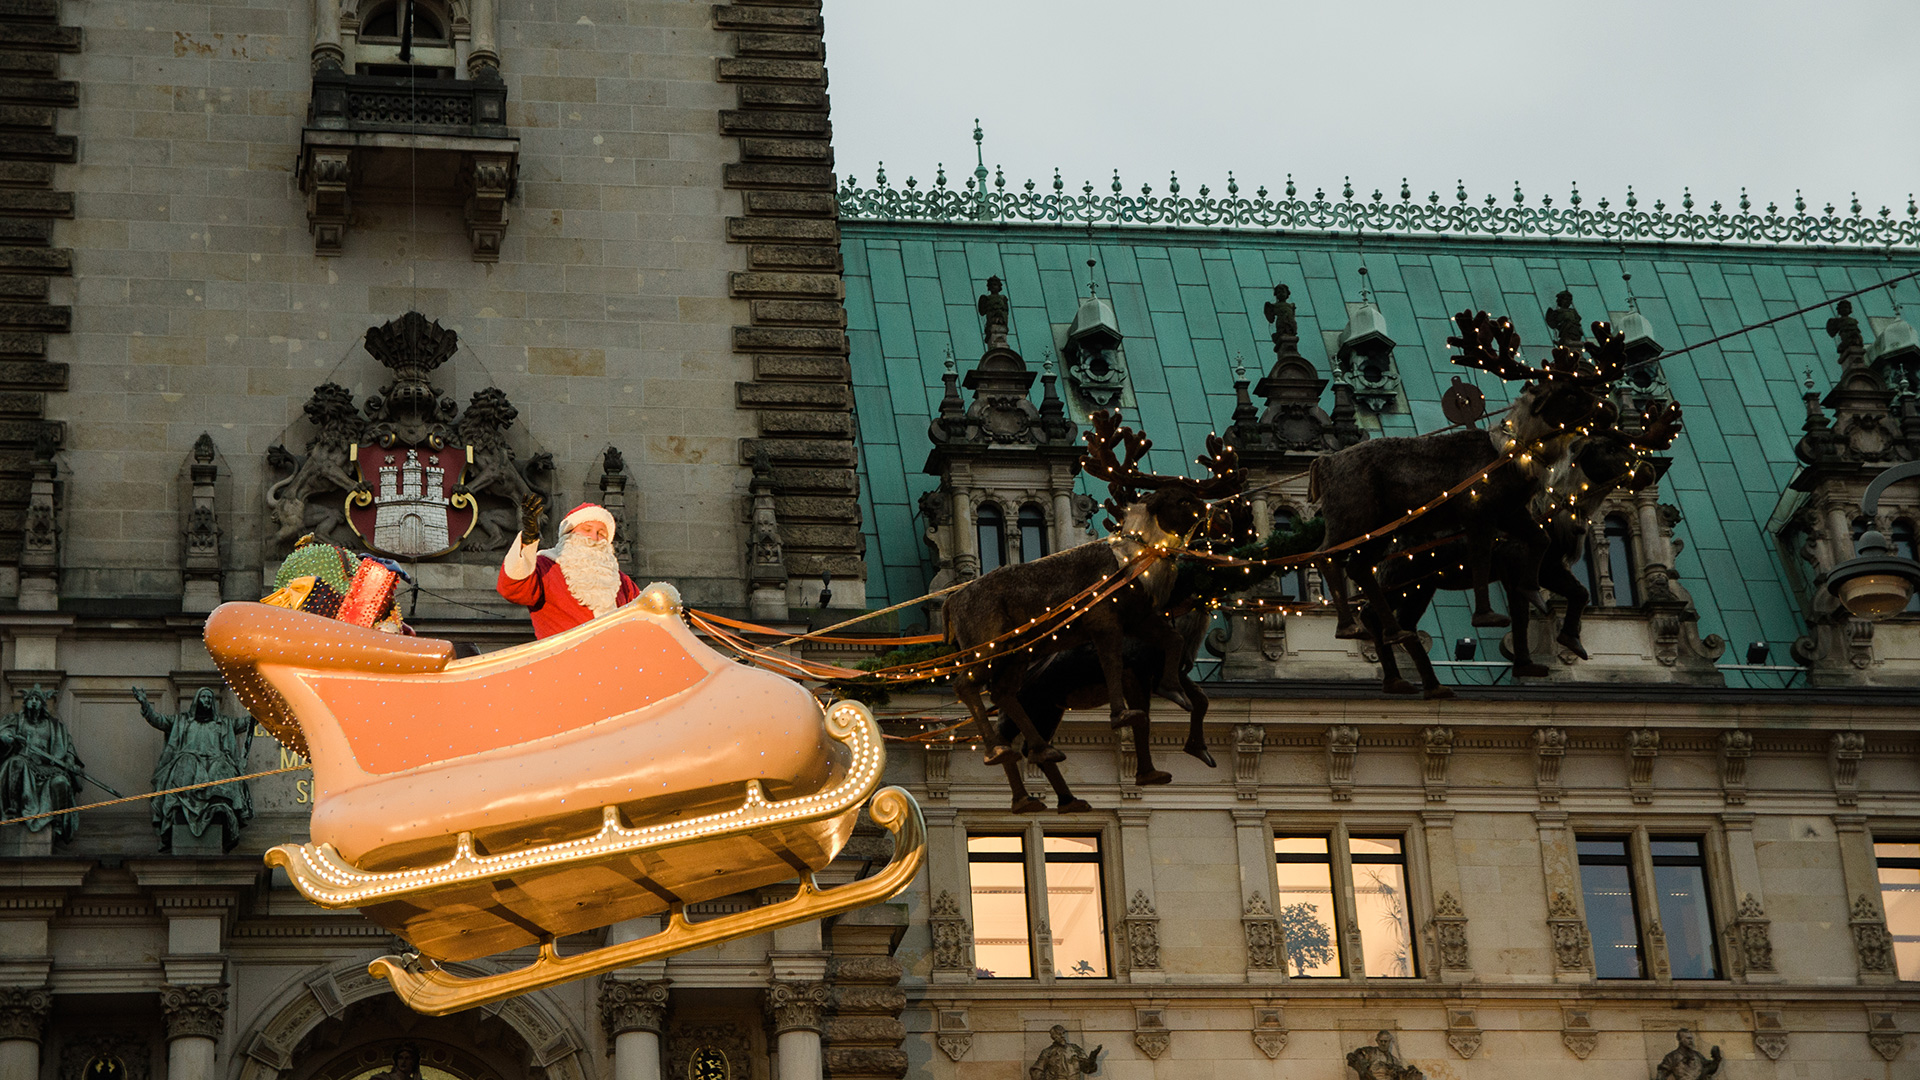 Santa Claus presides over Christmas markets all over the world.